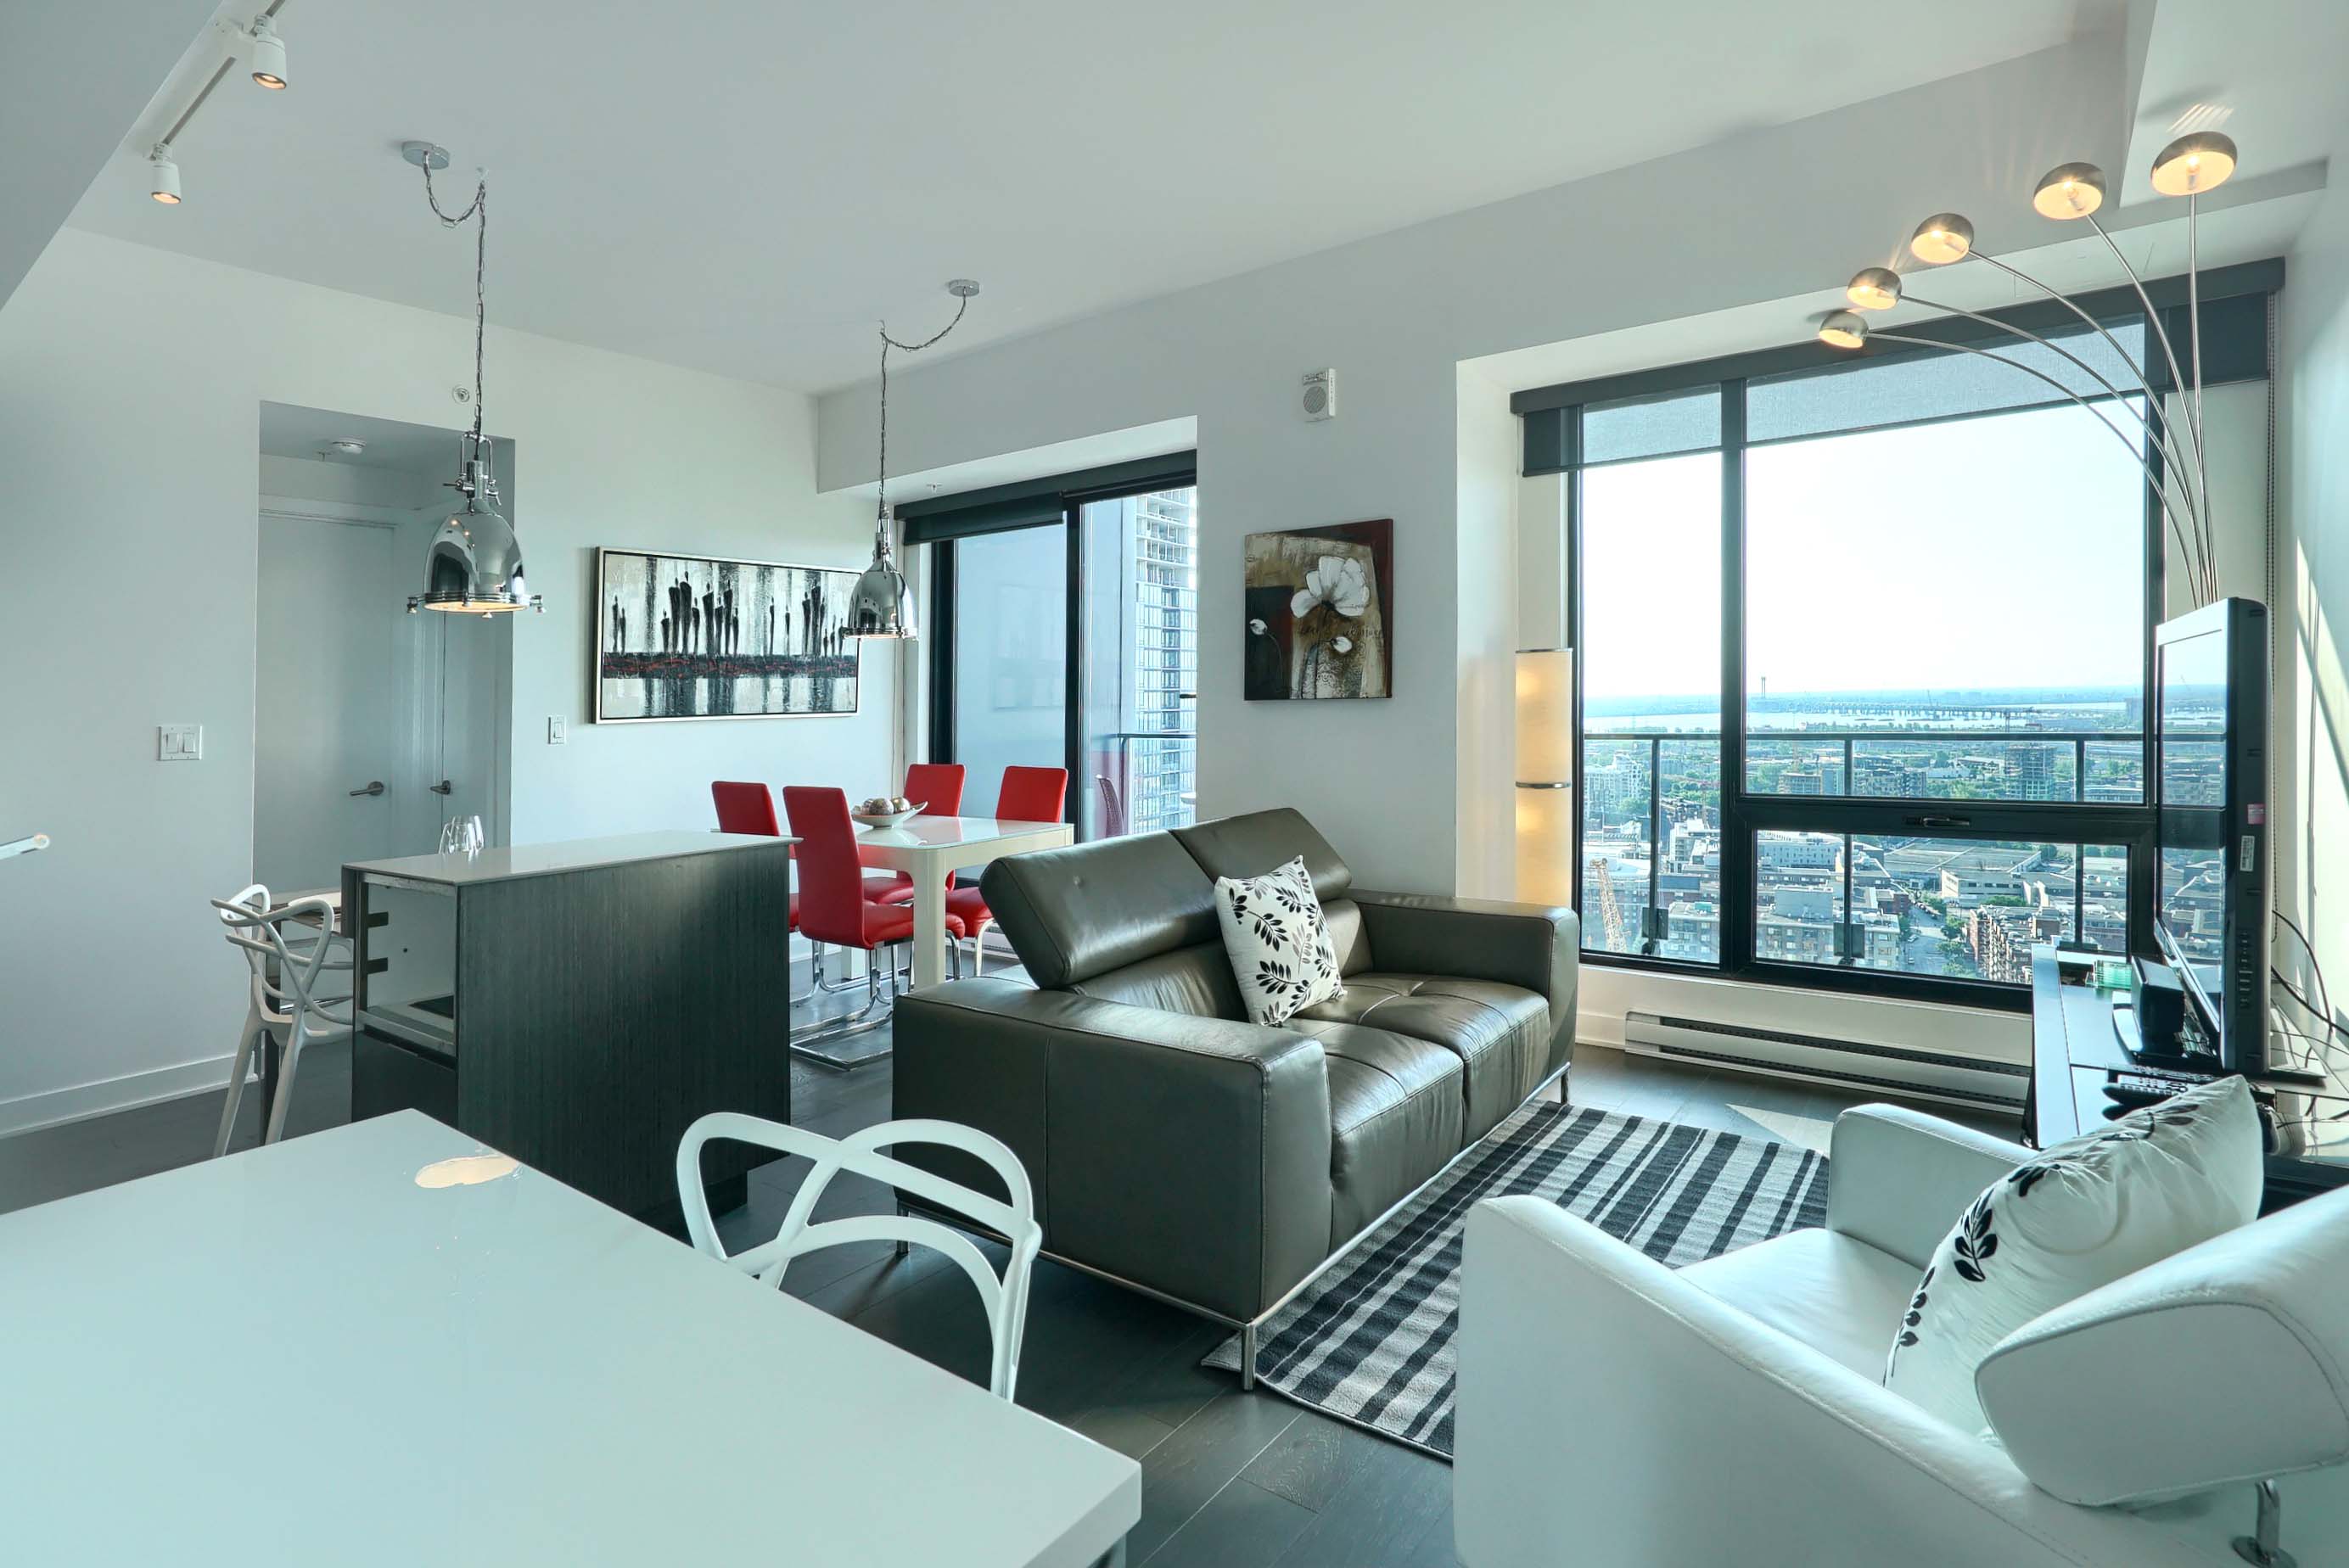 Looking from the office desk into the living room where you can see the modern furnishings, dining table for four and floor-to-ceiling windows in this furnished short term apartment rental in montreal